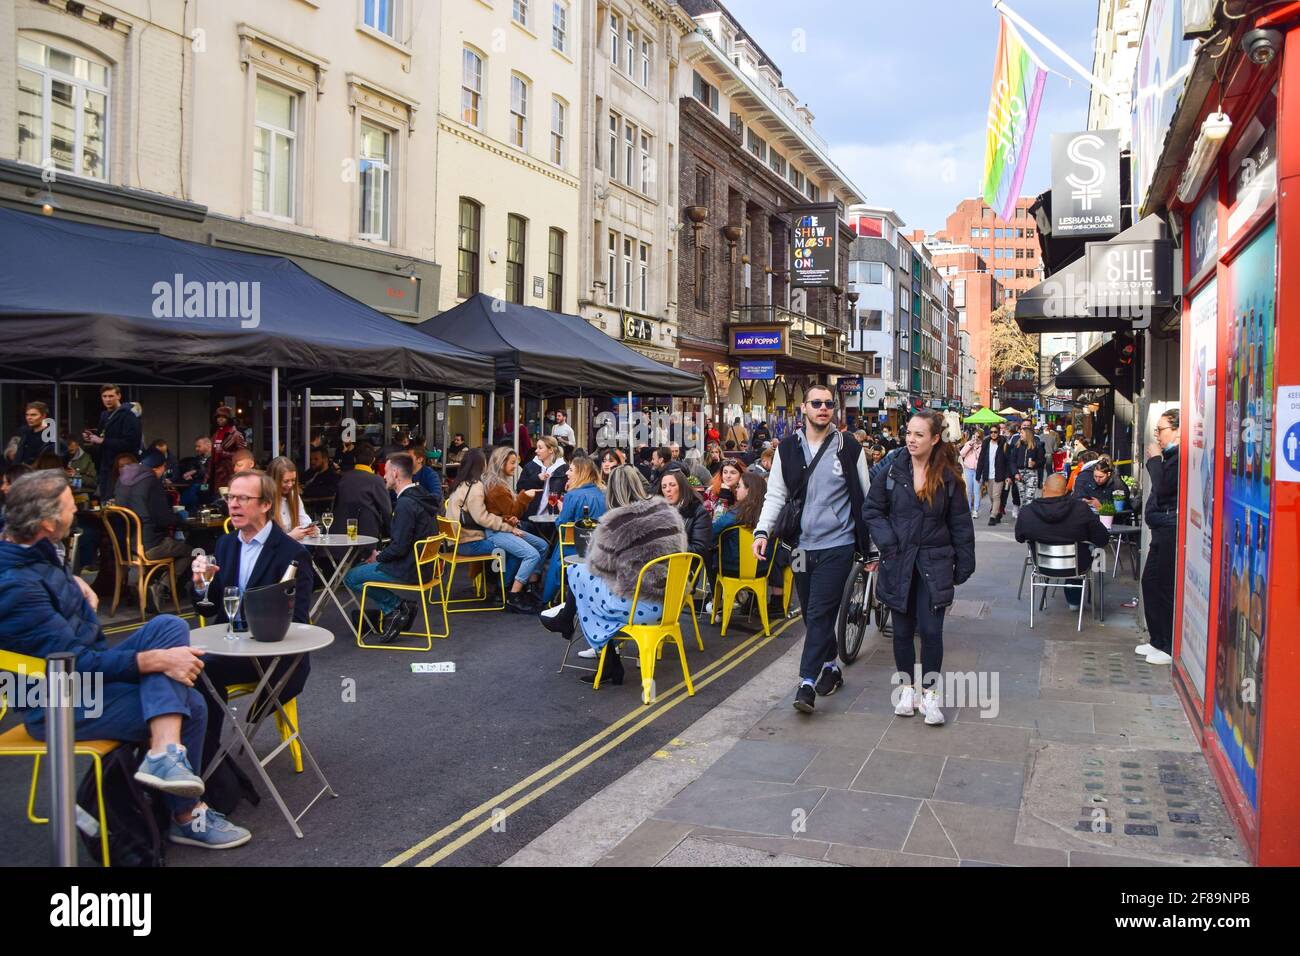 London, United Kingdom. 12th April 2021. Busy bars and restaurants in Old Compton Street, Soho. Shops, restaurants, bars and other businesses reopened today after almost four months as further lockdown rules are relaxed in England. Stock Photo